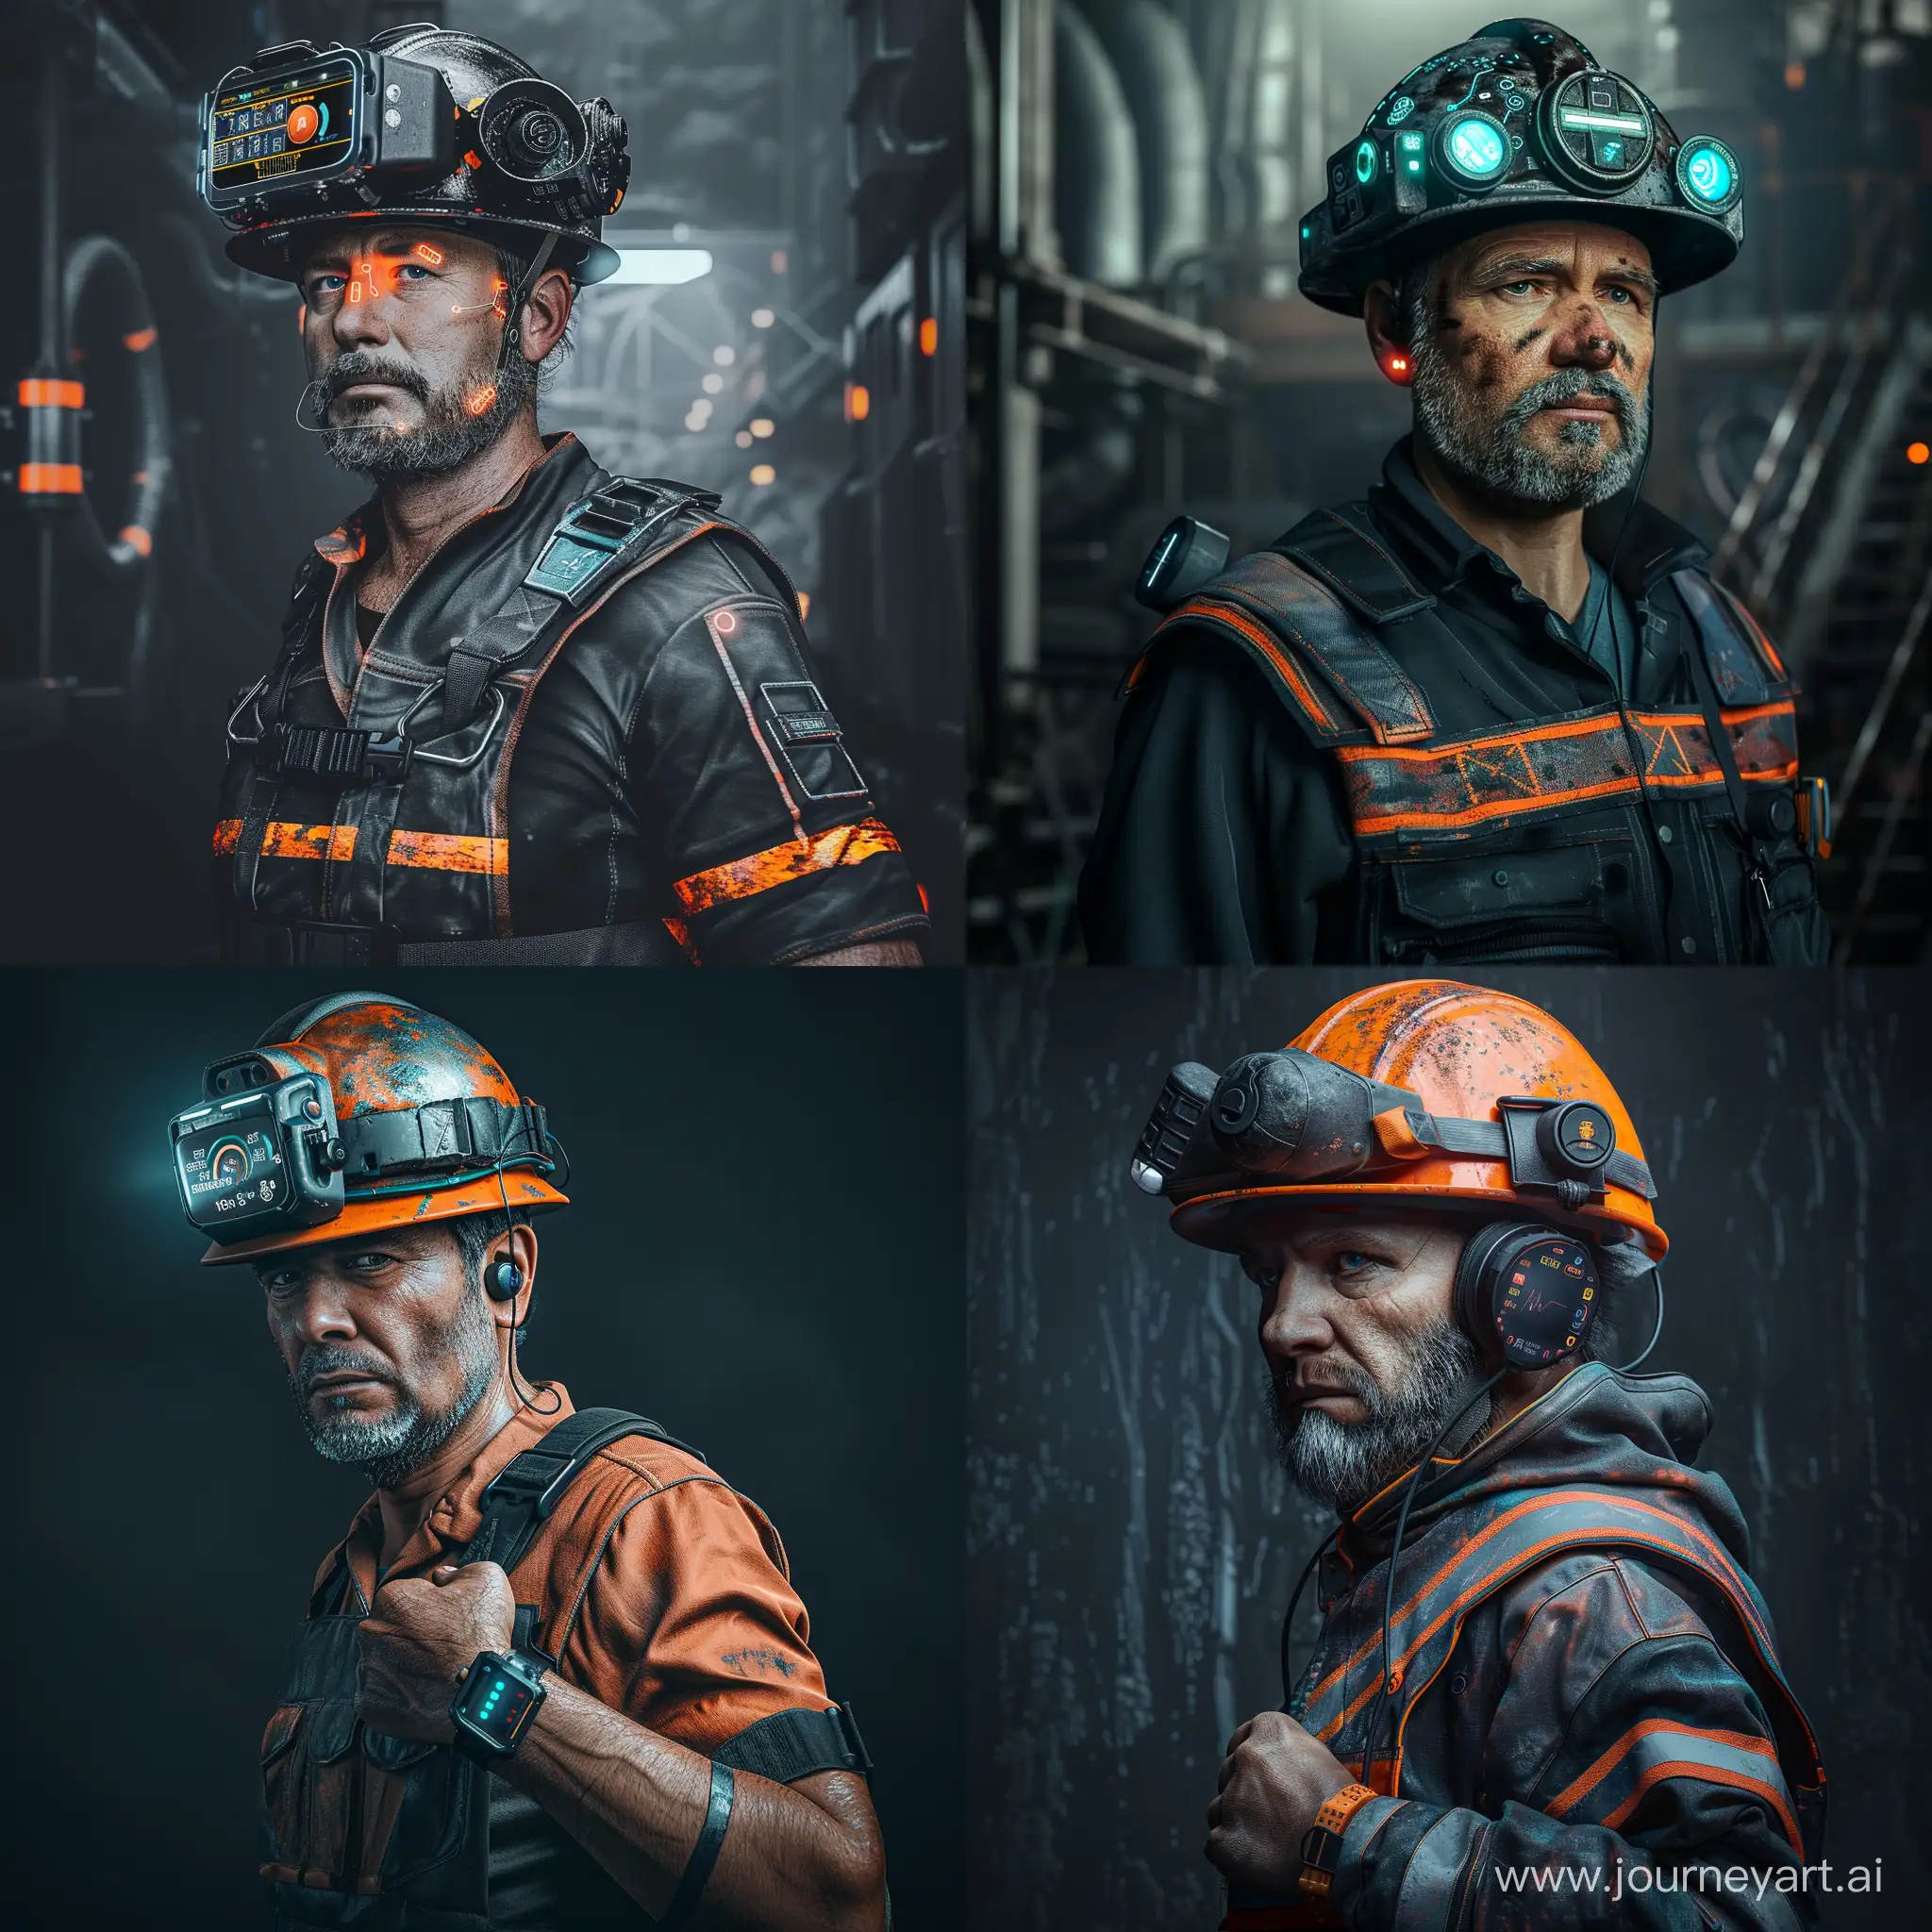 realistic badass miner with miners' Safety clothing is wearing a smart hardhat with sensors. He is also wearing a smart wristband that can track his location and heart rate, oxymetr or becomes unresponsive. dark mod in mine